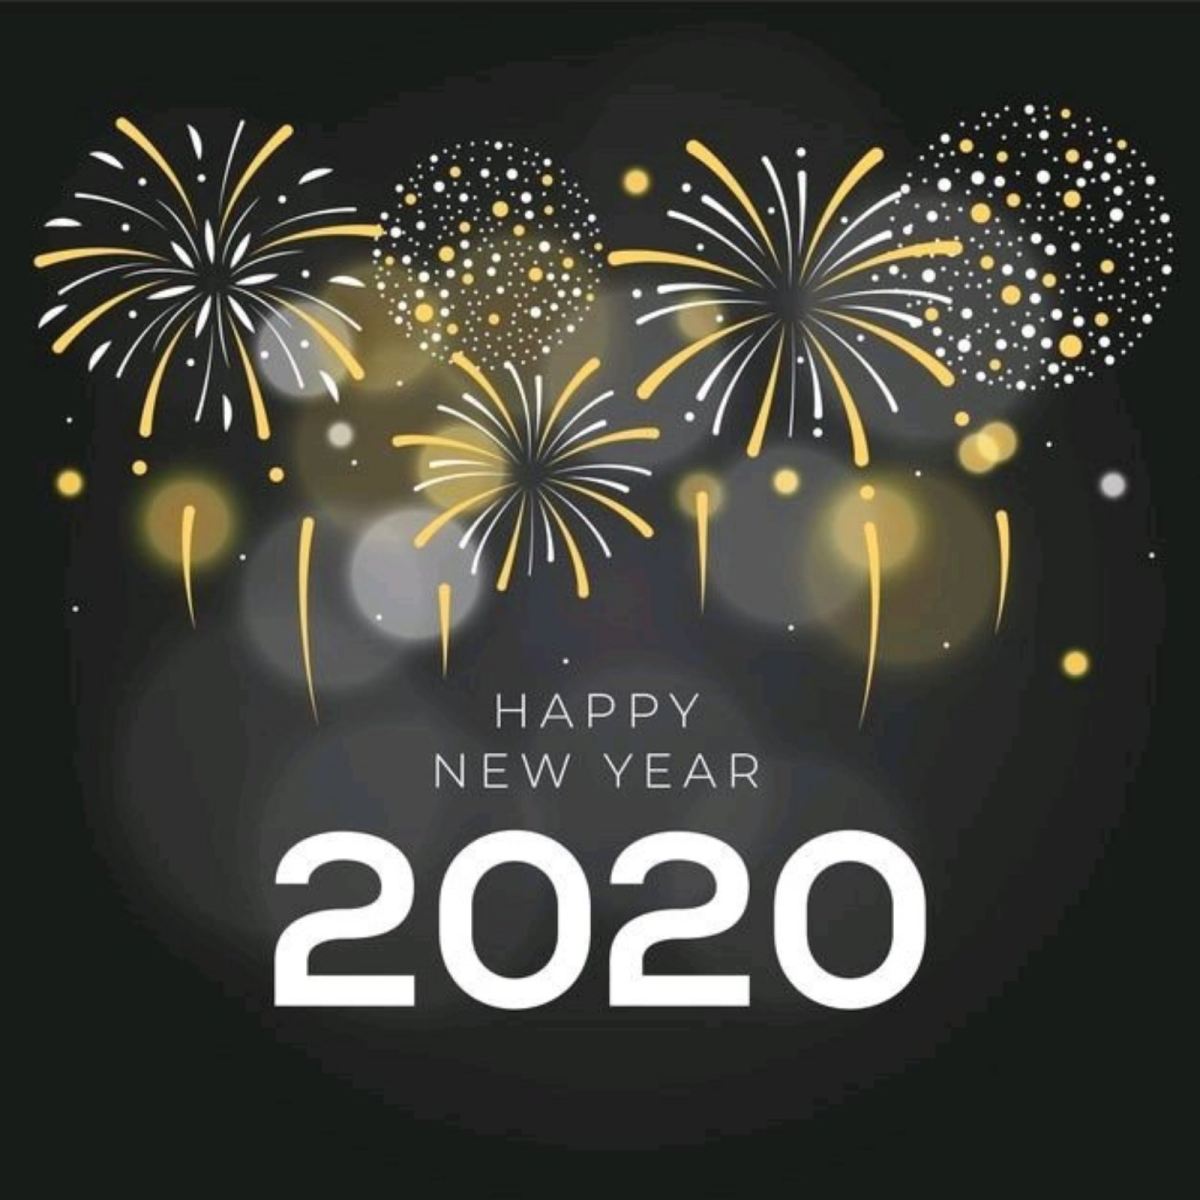 Dear valued customers, Pusat Perabot Impian wish you and your family have a fabulous year in 2020. 